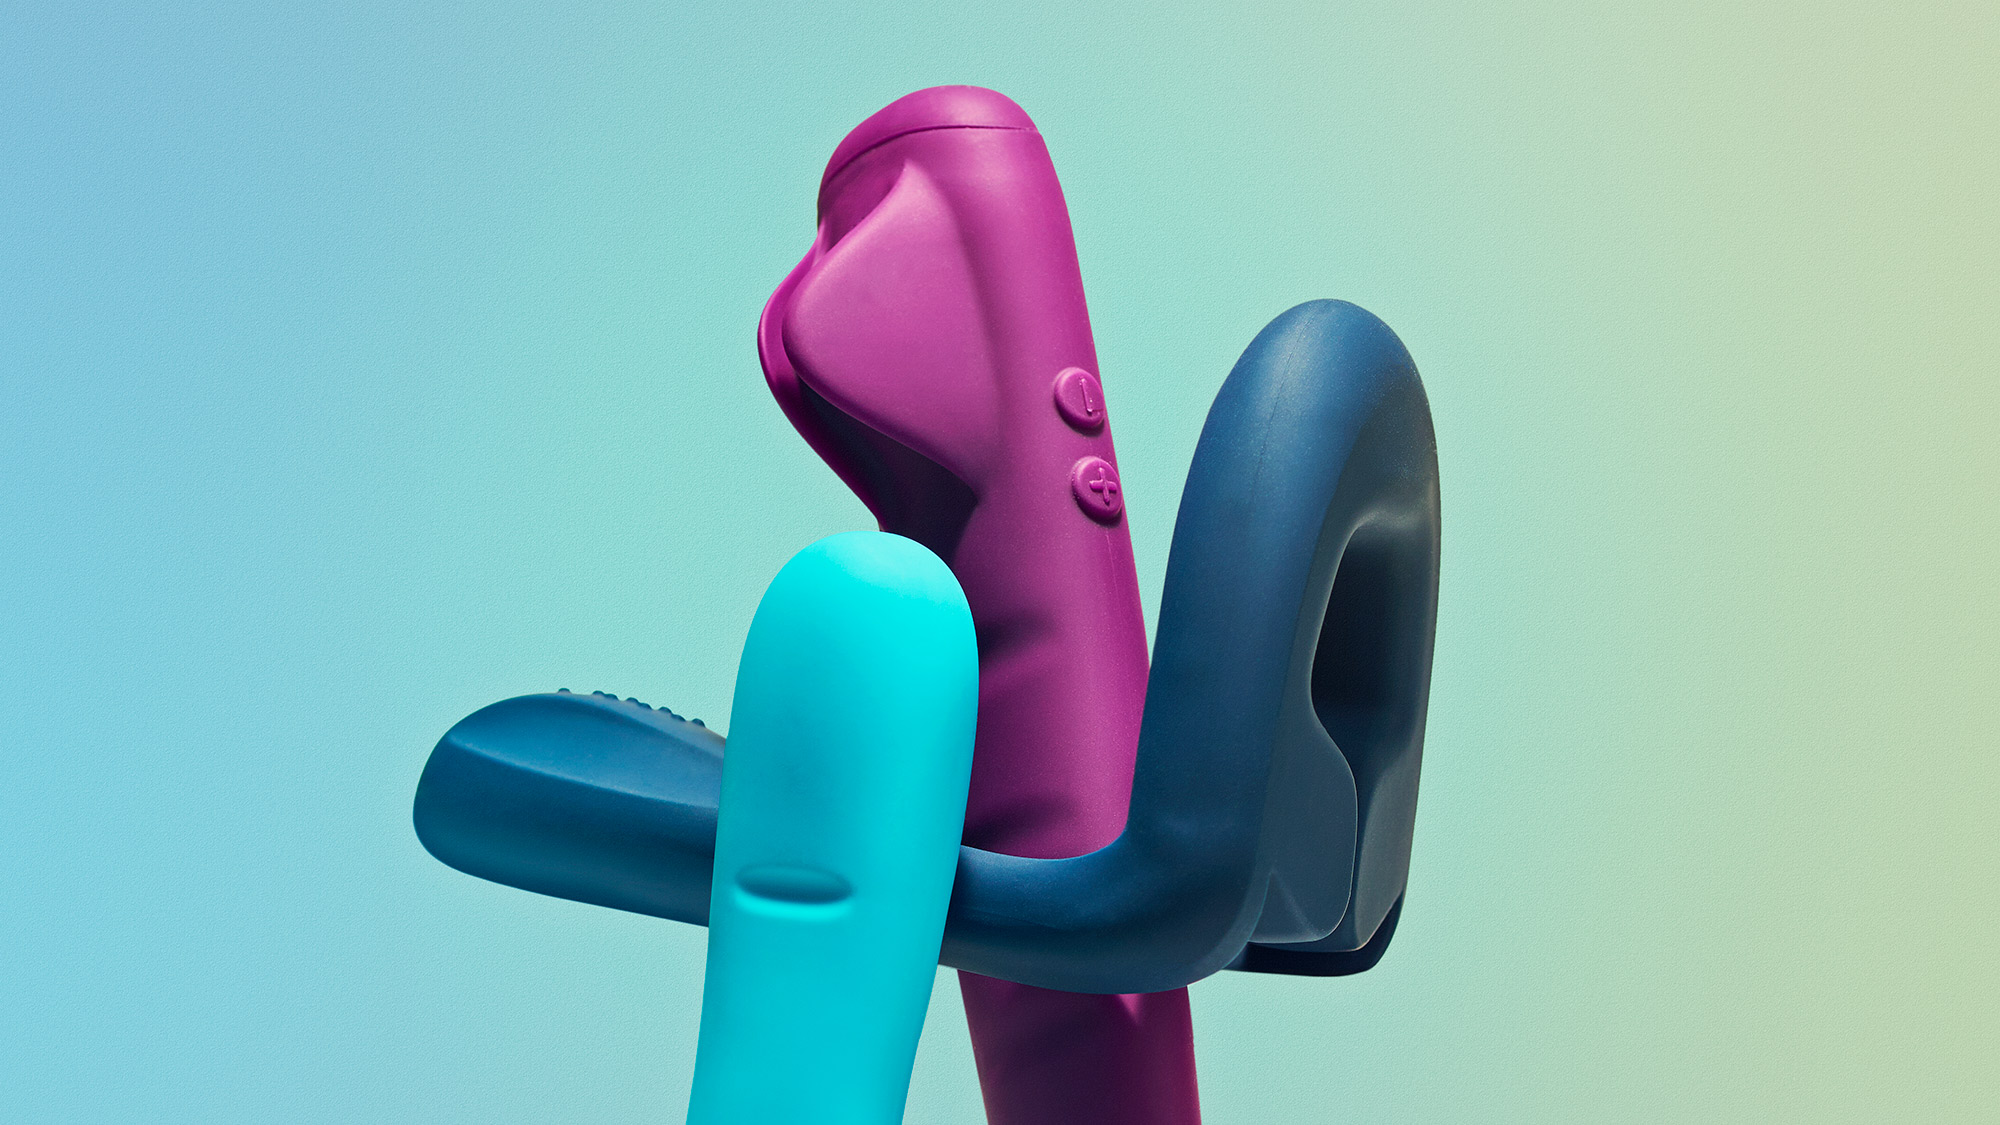 Sex toys engineered to be medical devices | Popular Science